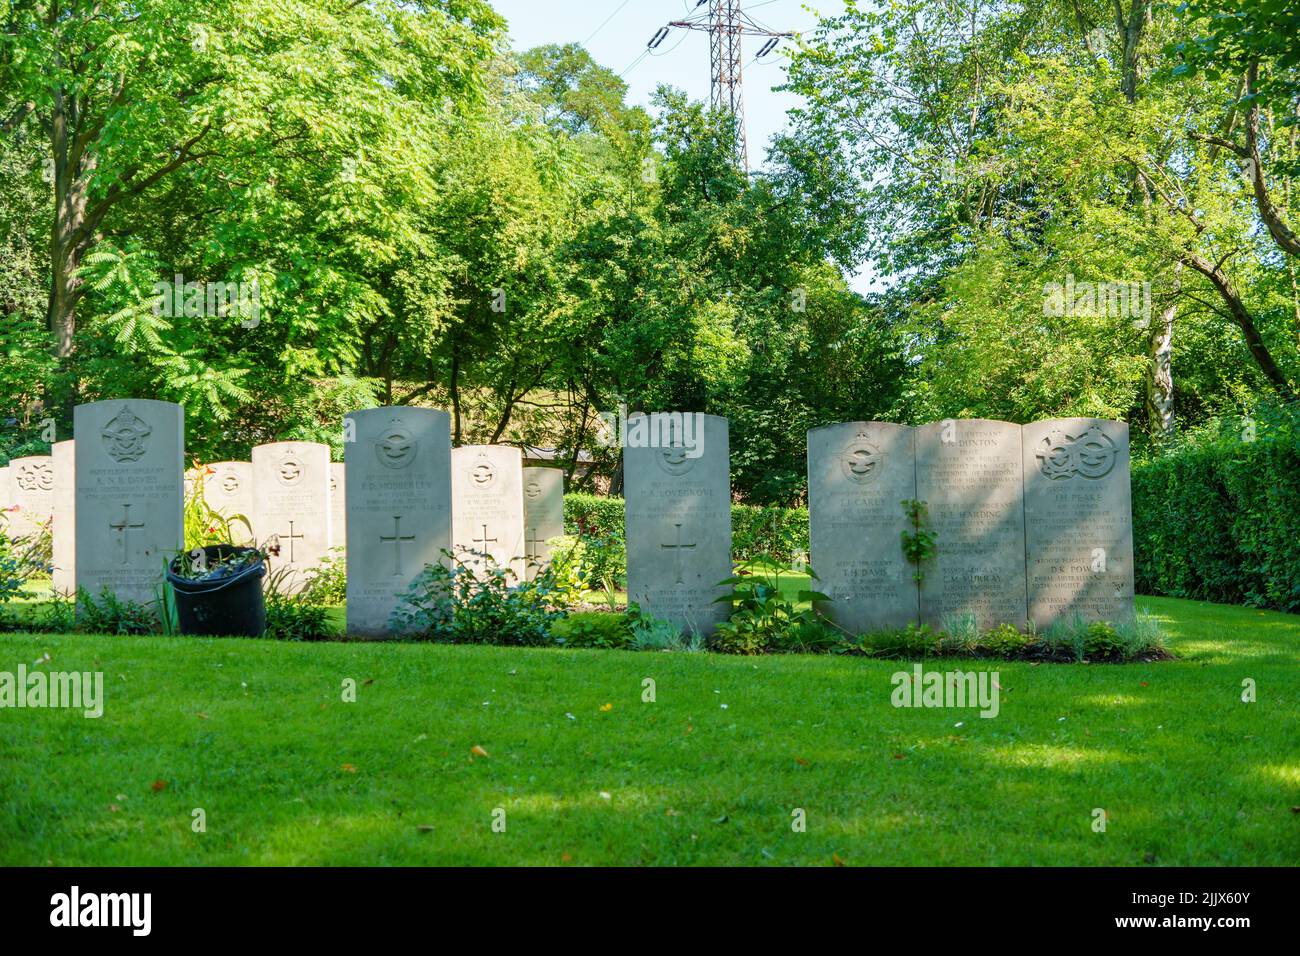 The graves of fallen soldiers during the Second World War in Cytadela park, Poland Stock Photo